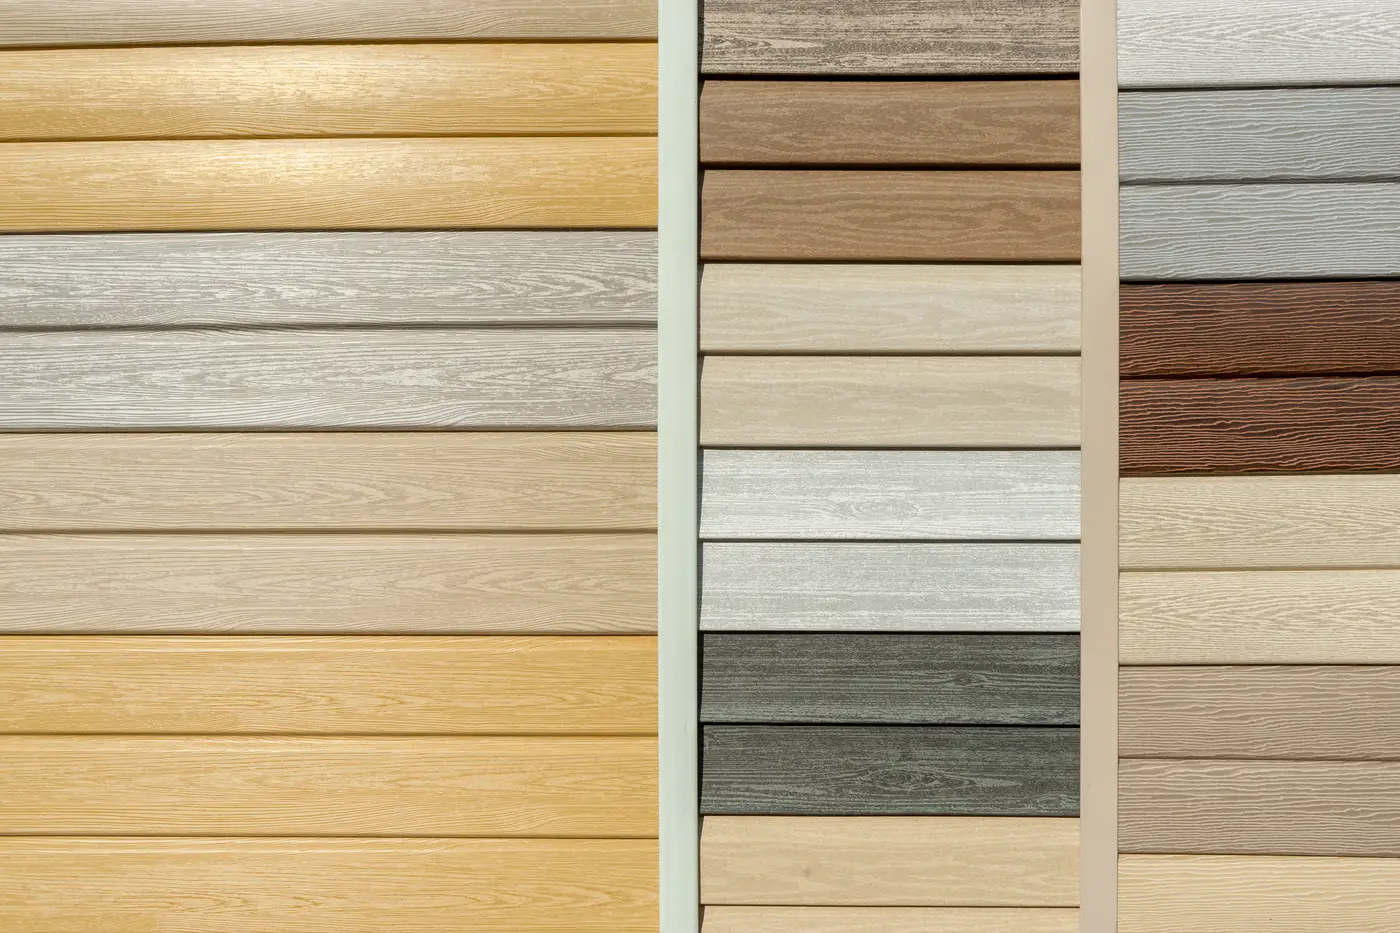 Samples of vinyl siding imitation wood in various colors and stains